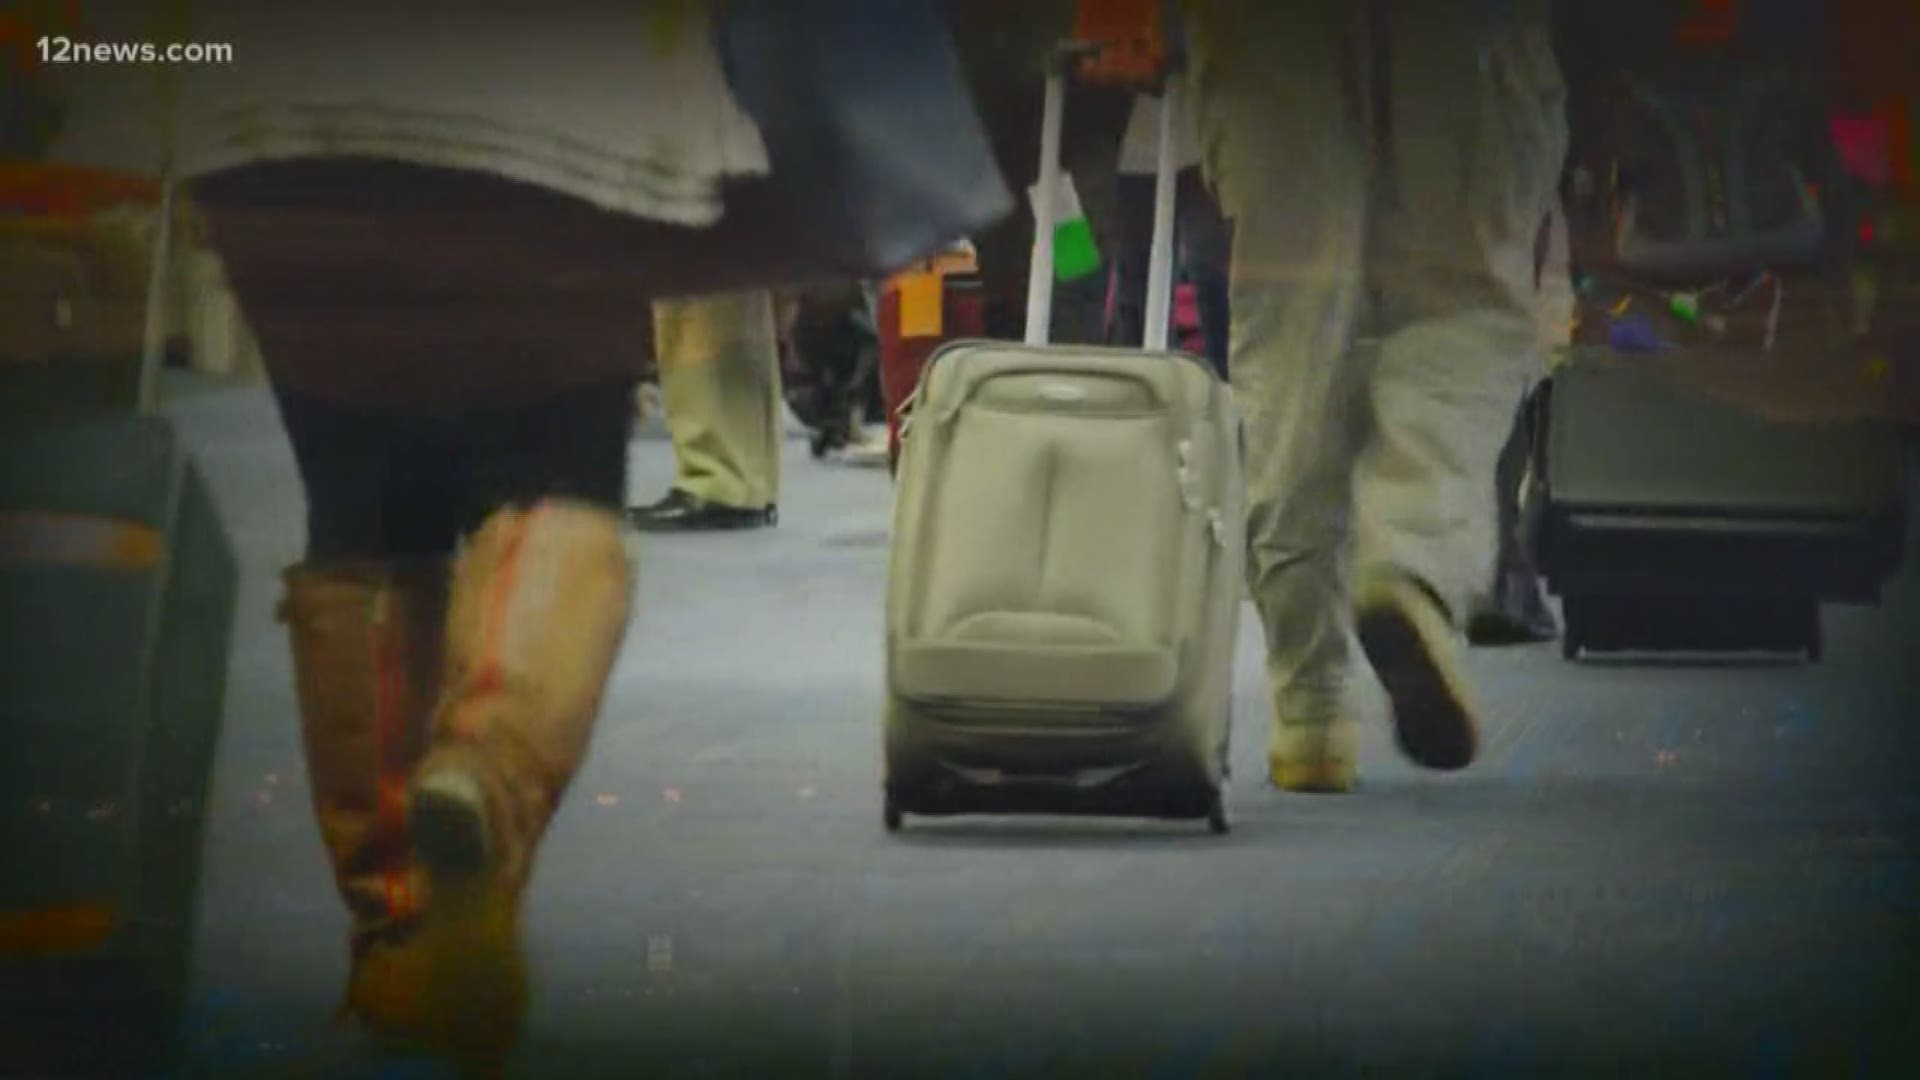 A Valley man was recently arrested for stealing bags right off the baggage claim carousels in Sky Harbor. Team 12 looks at how you can keep your bags safe when traveling.